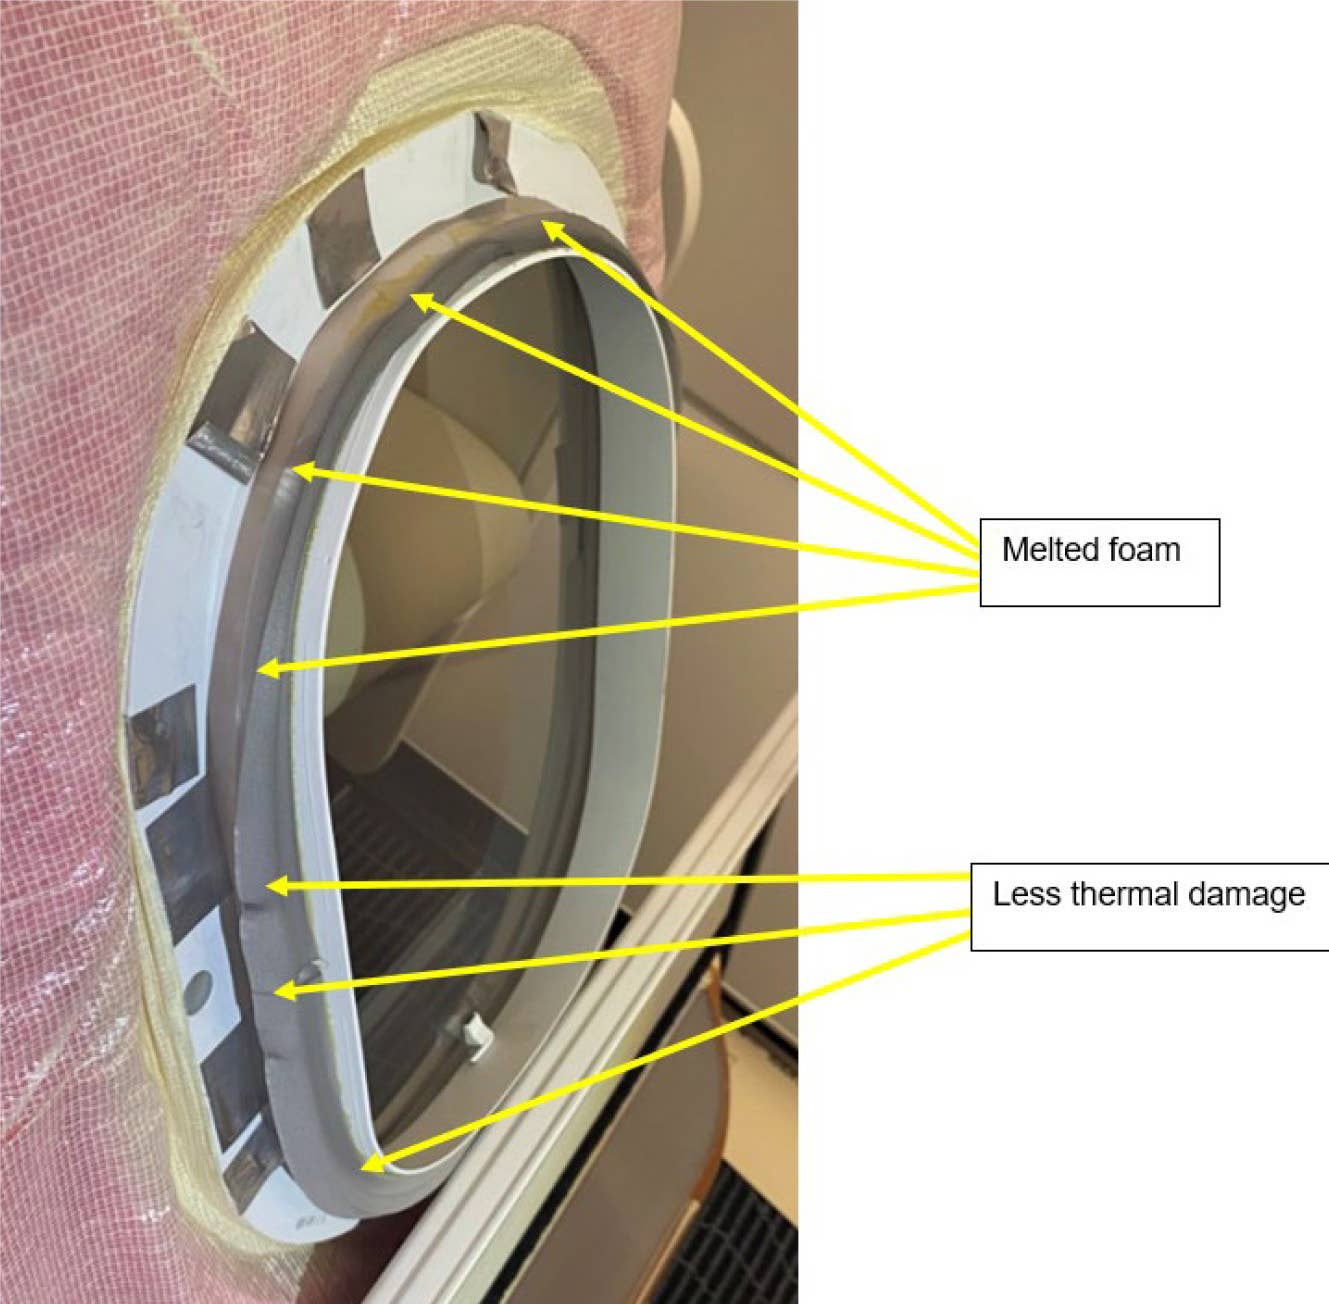 Labeled damage to the window assembly